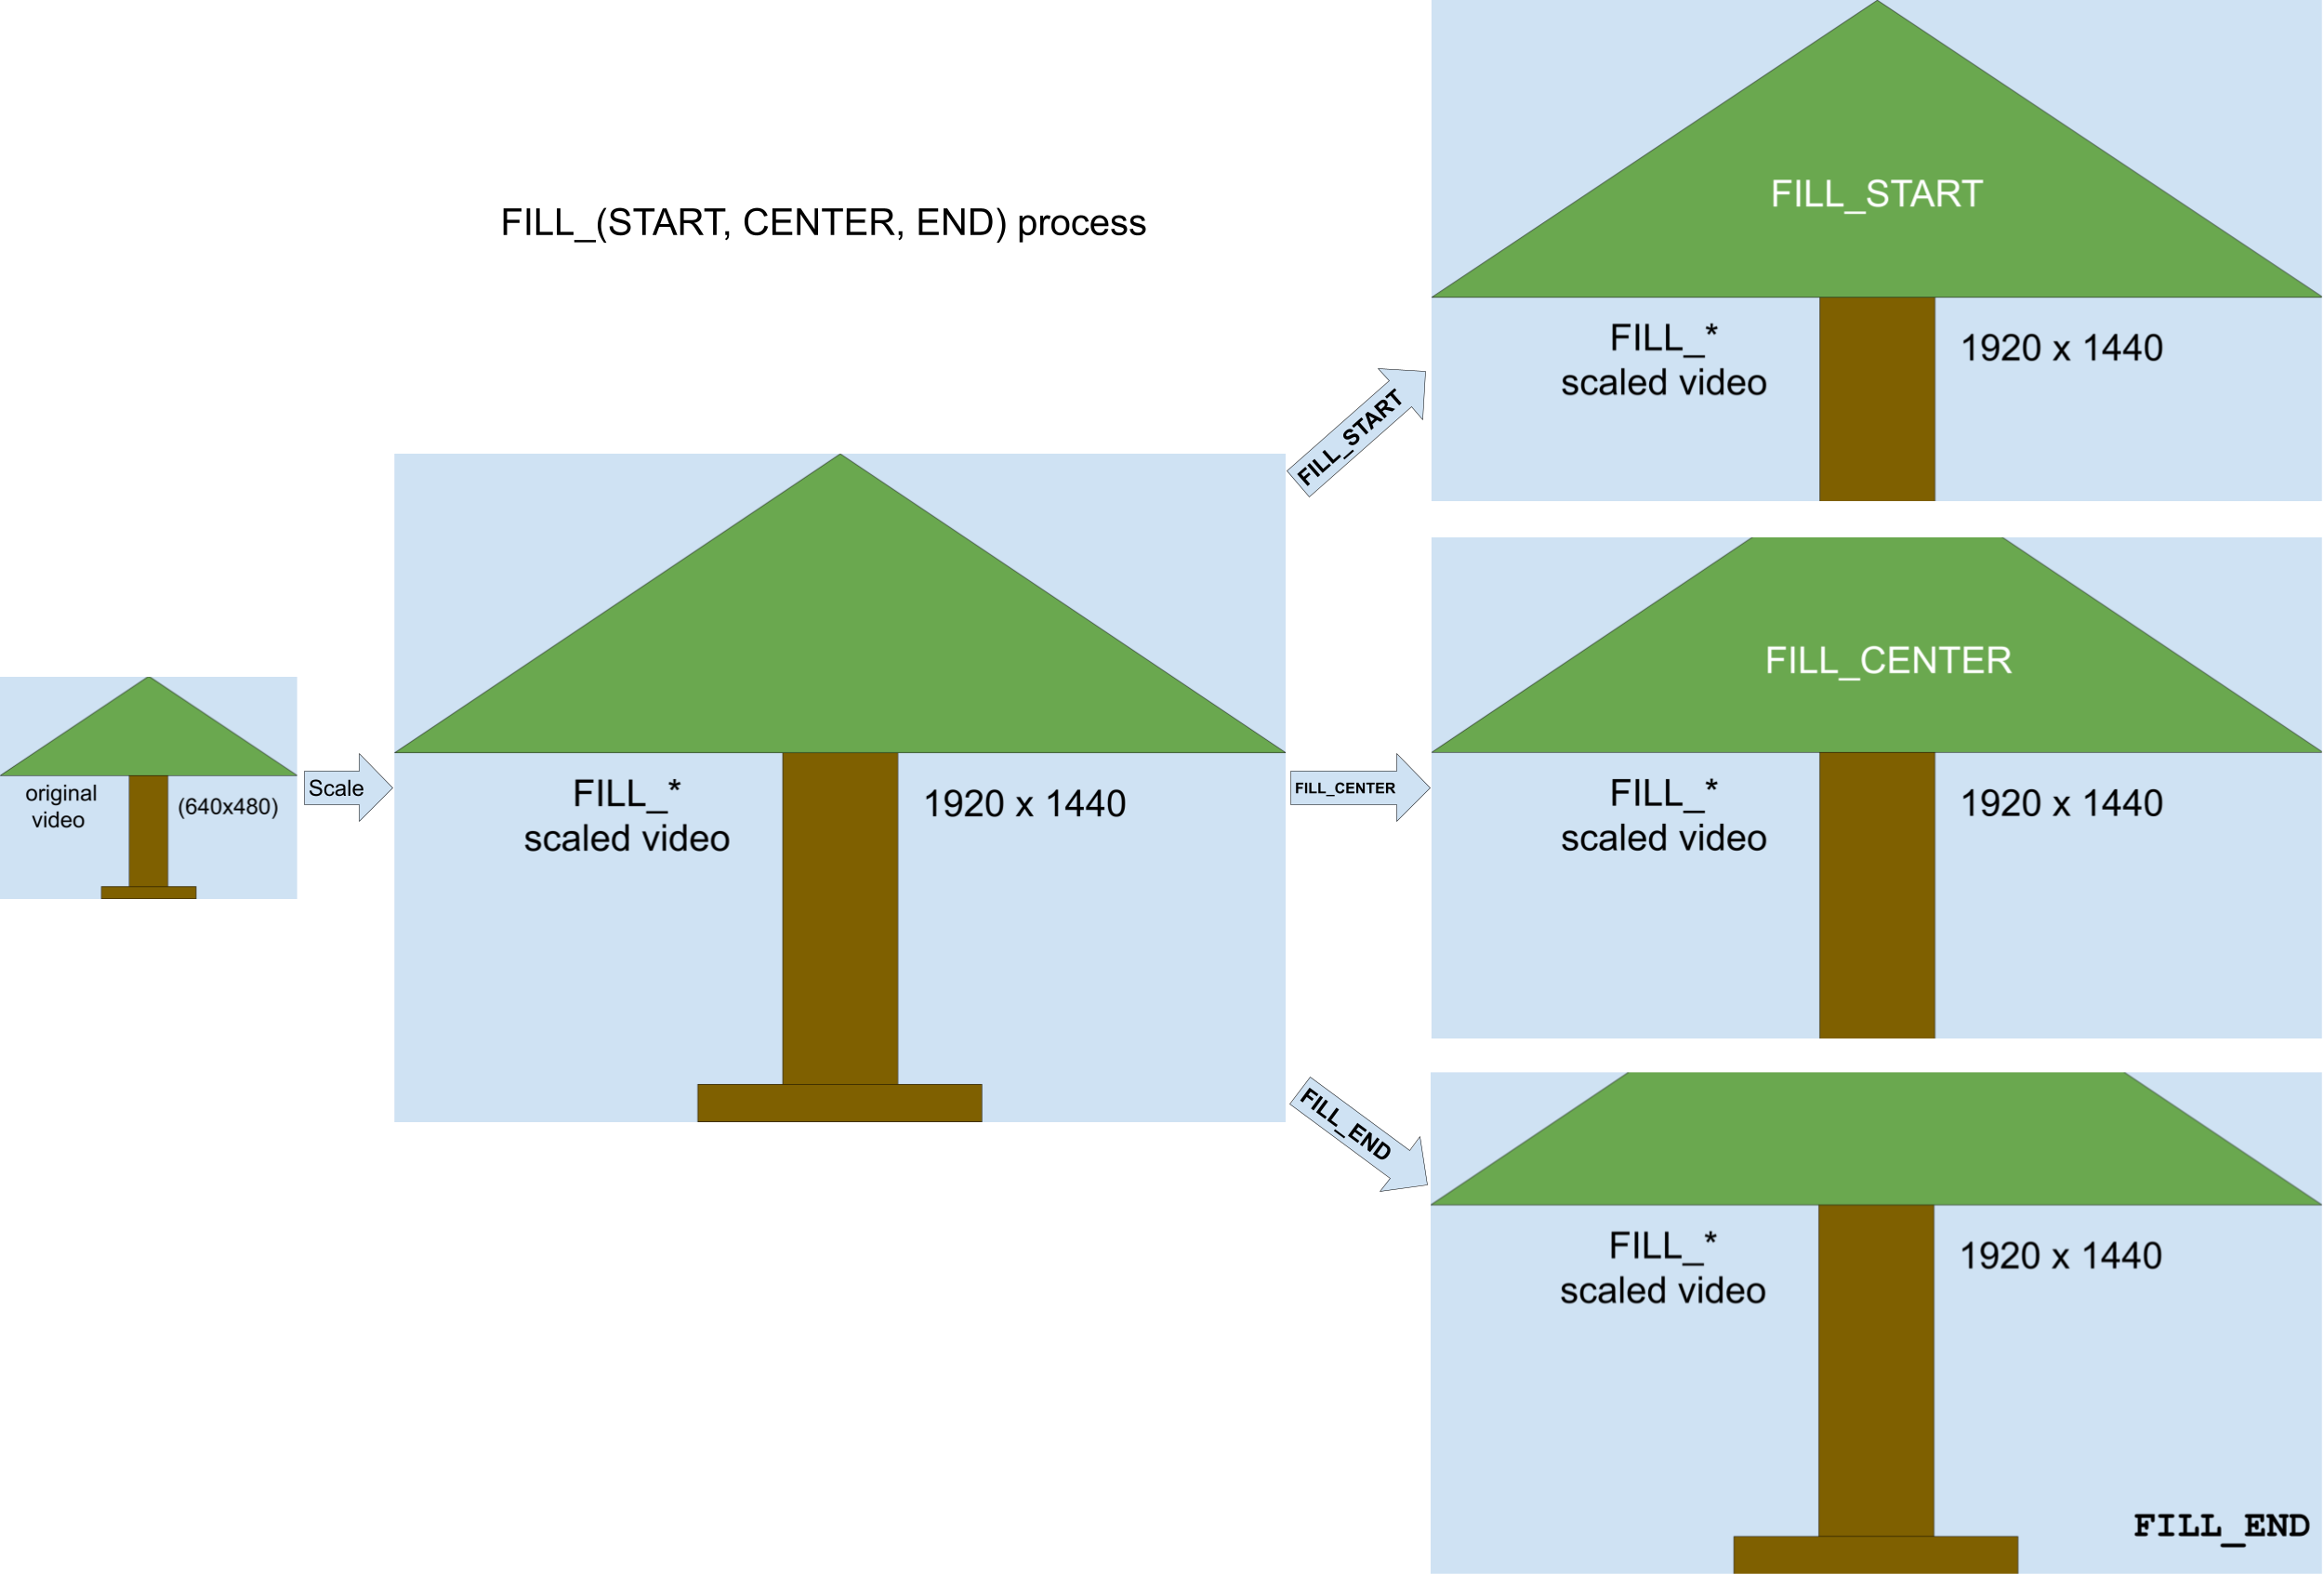 Image showing the FILL_START, FILL_CENTER, and FILL_END scaling process